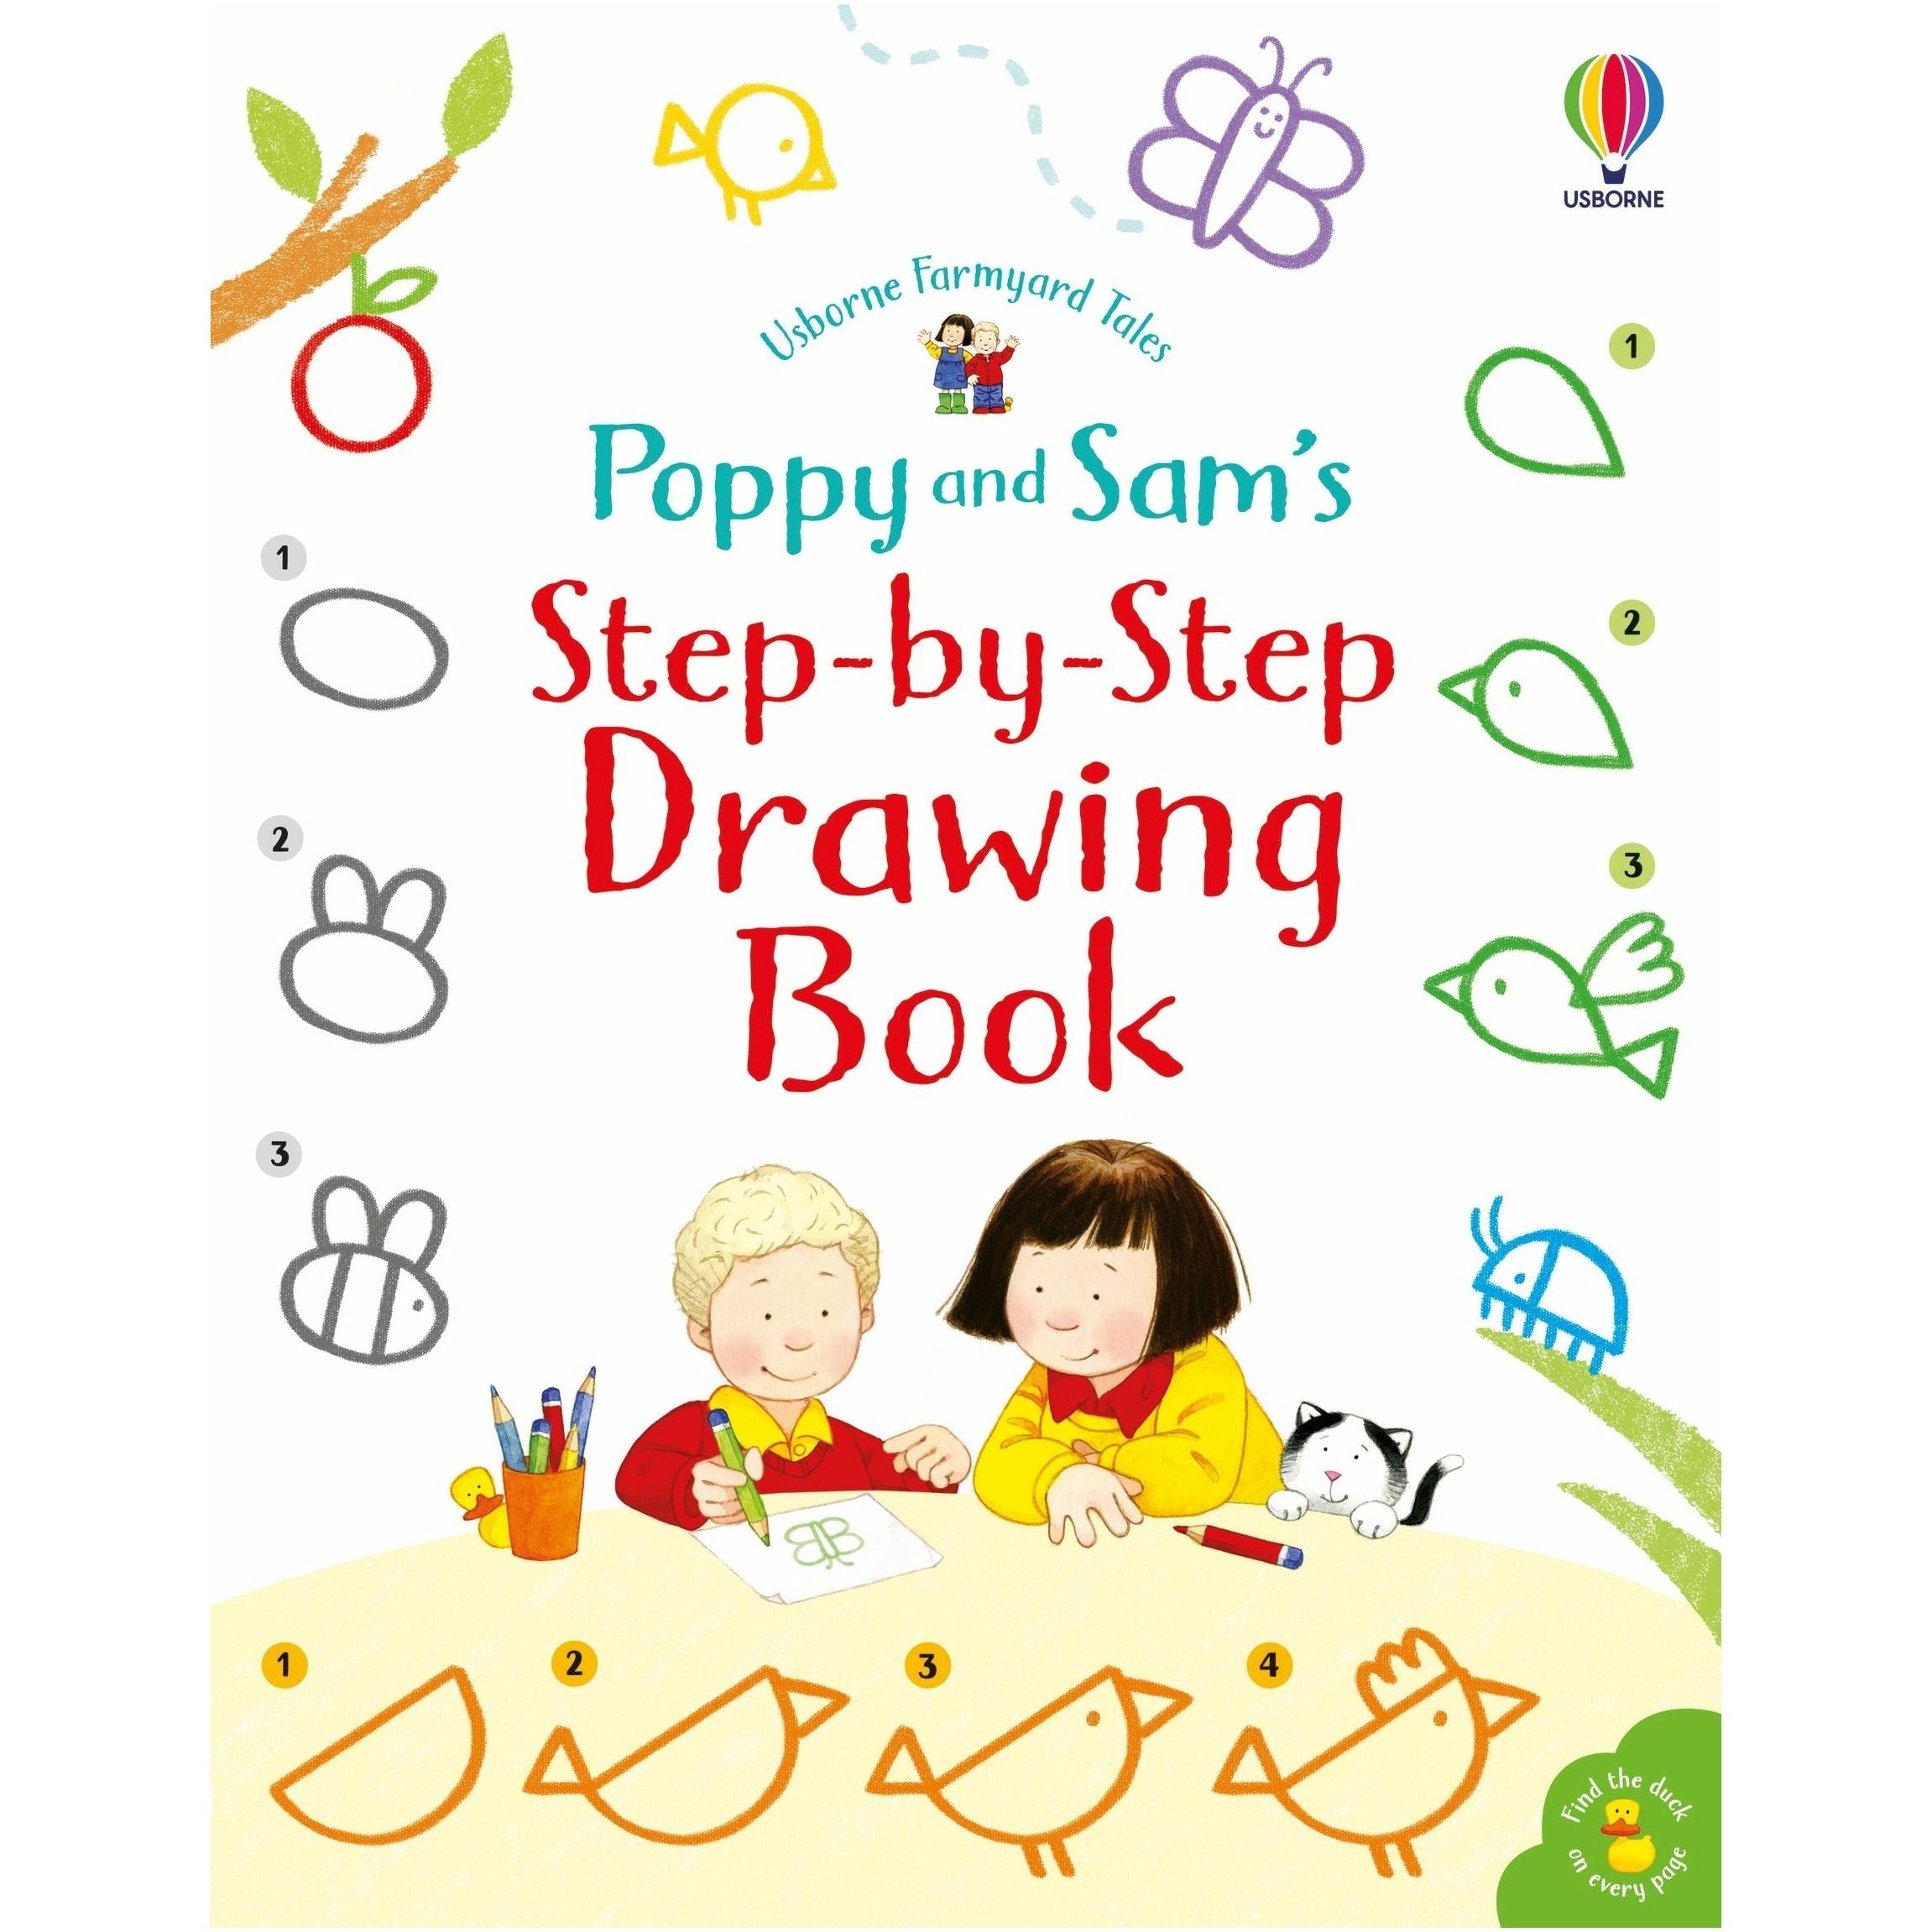 Poppy and Sam's Step-by-step Drawing Book